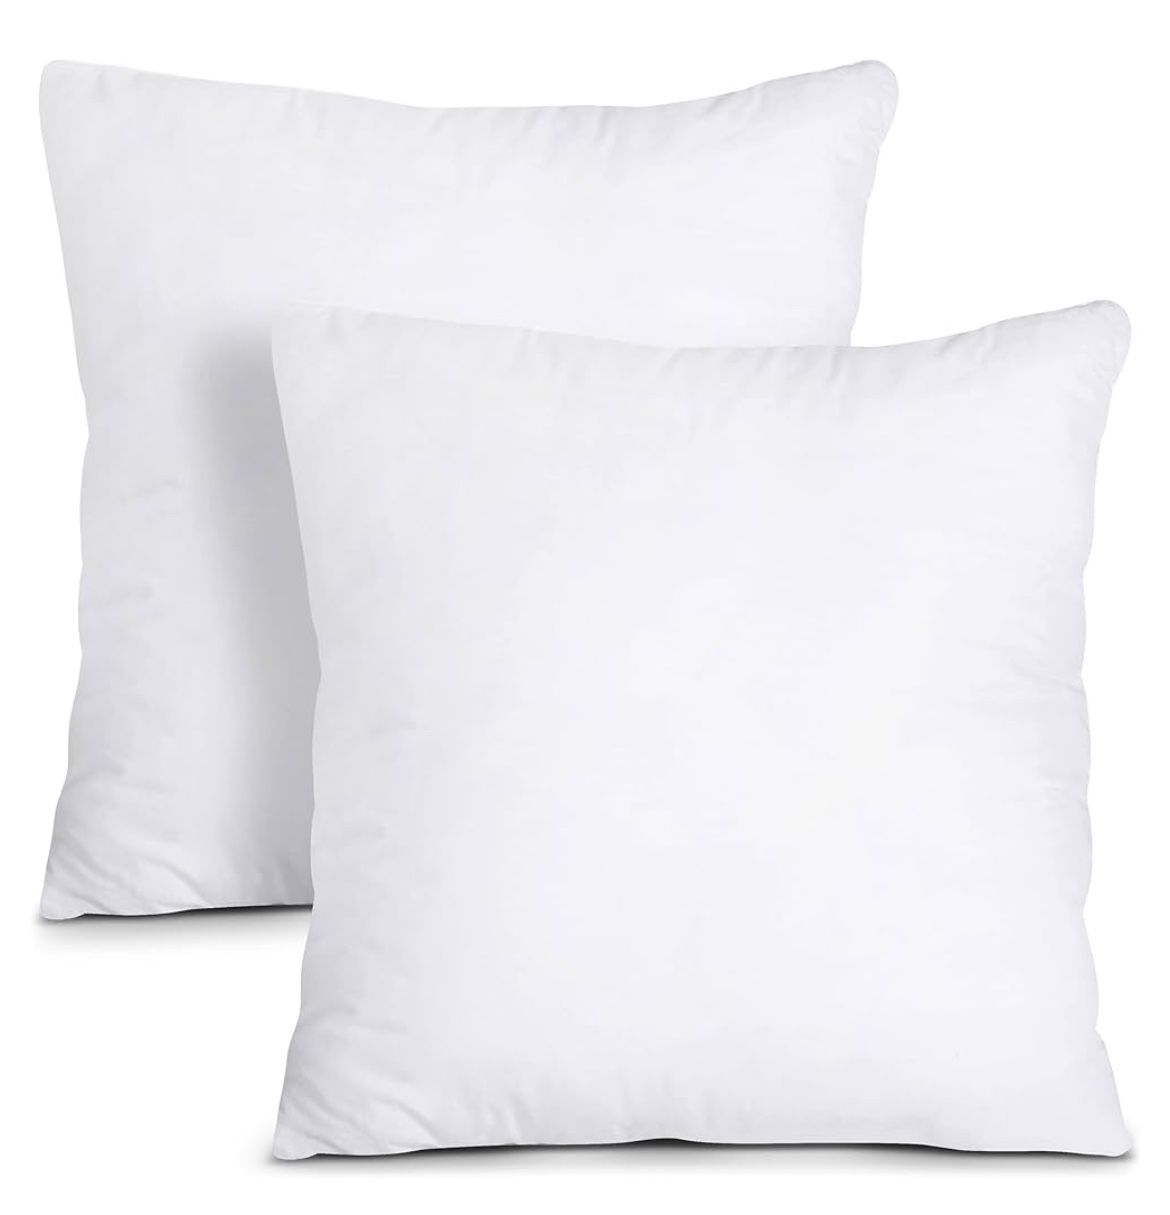 Utopia Bedding Throw Pillows Insert (Pack Of 2, White) - 28 X 28 Inches Bed And Couch 